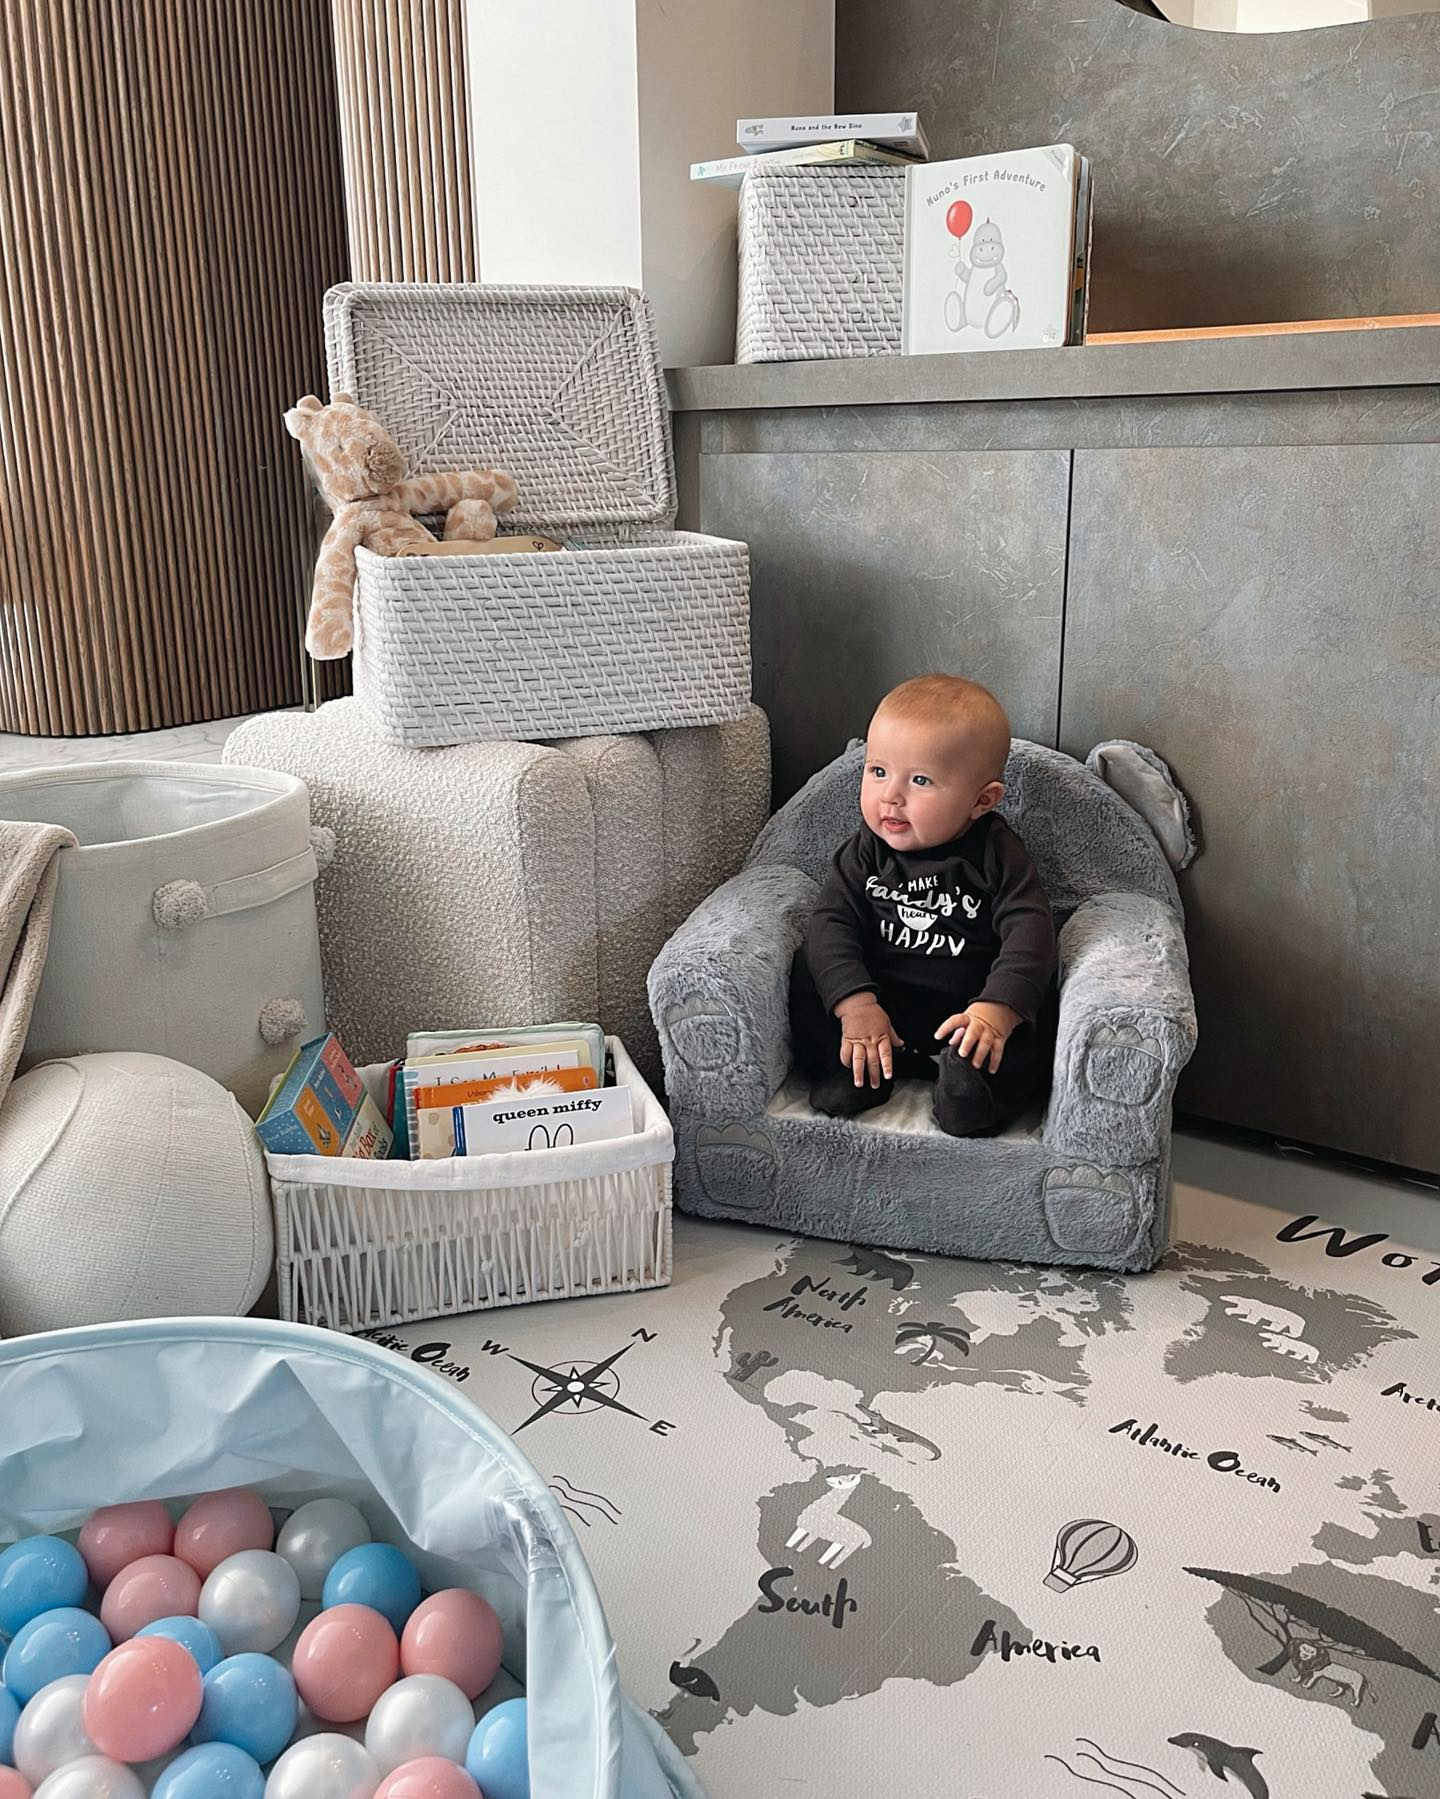 Even little Bambi's playroom is the result of a successful bargain hunt in Homesense